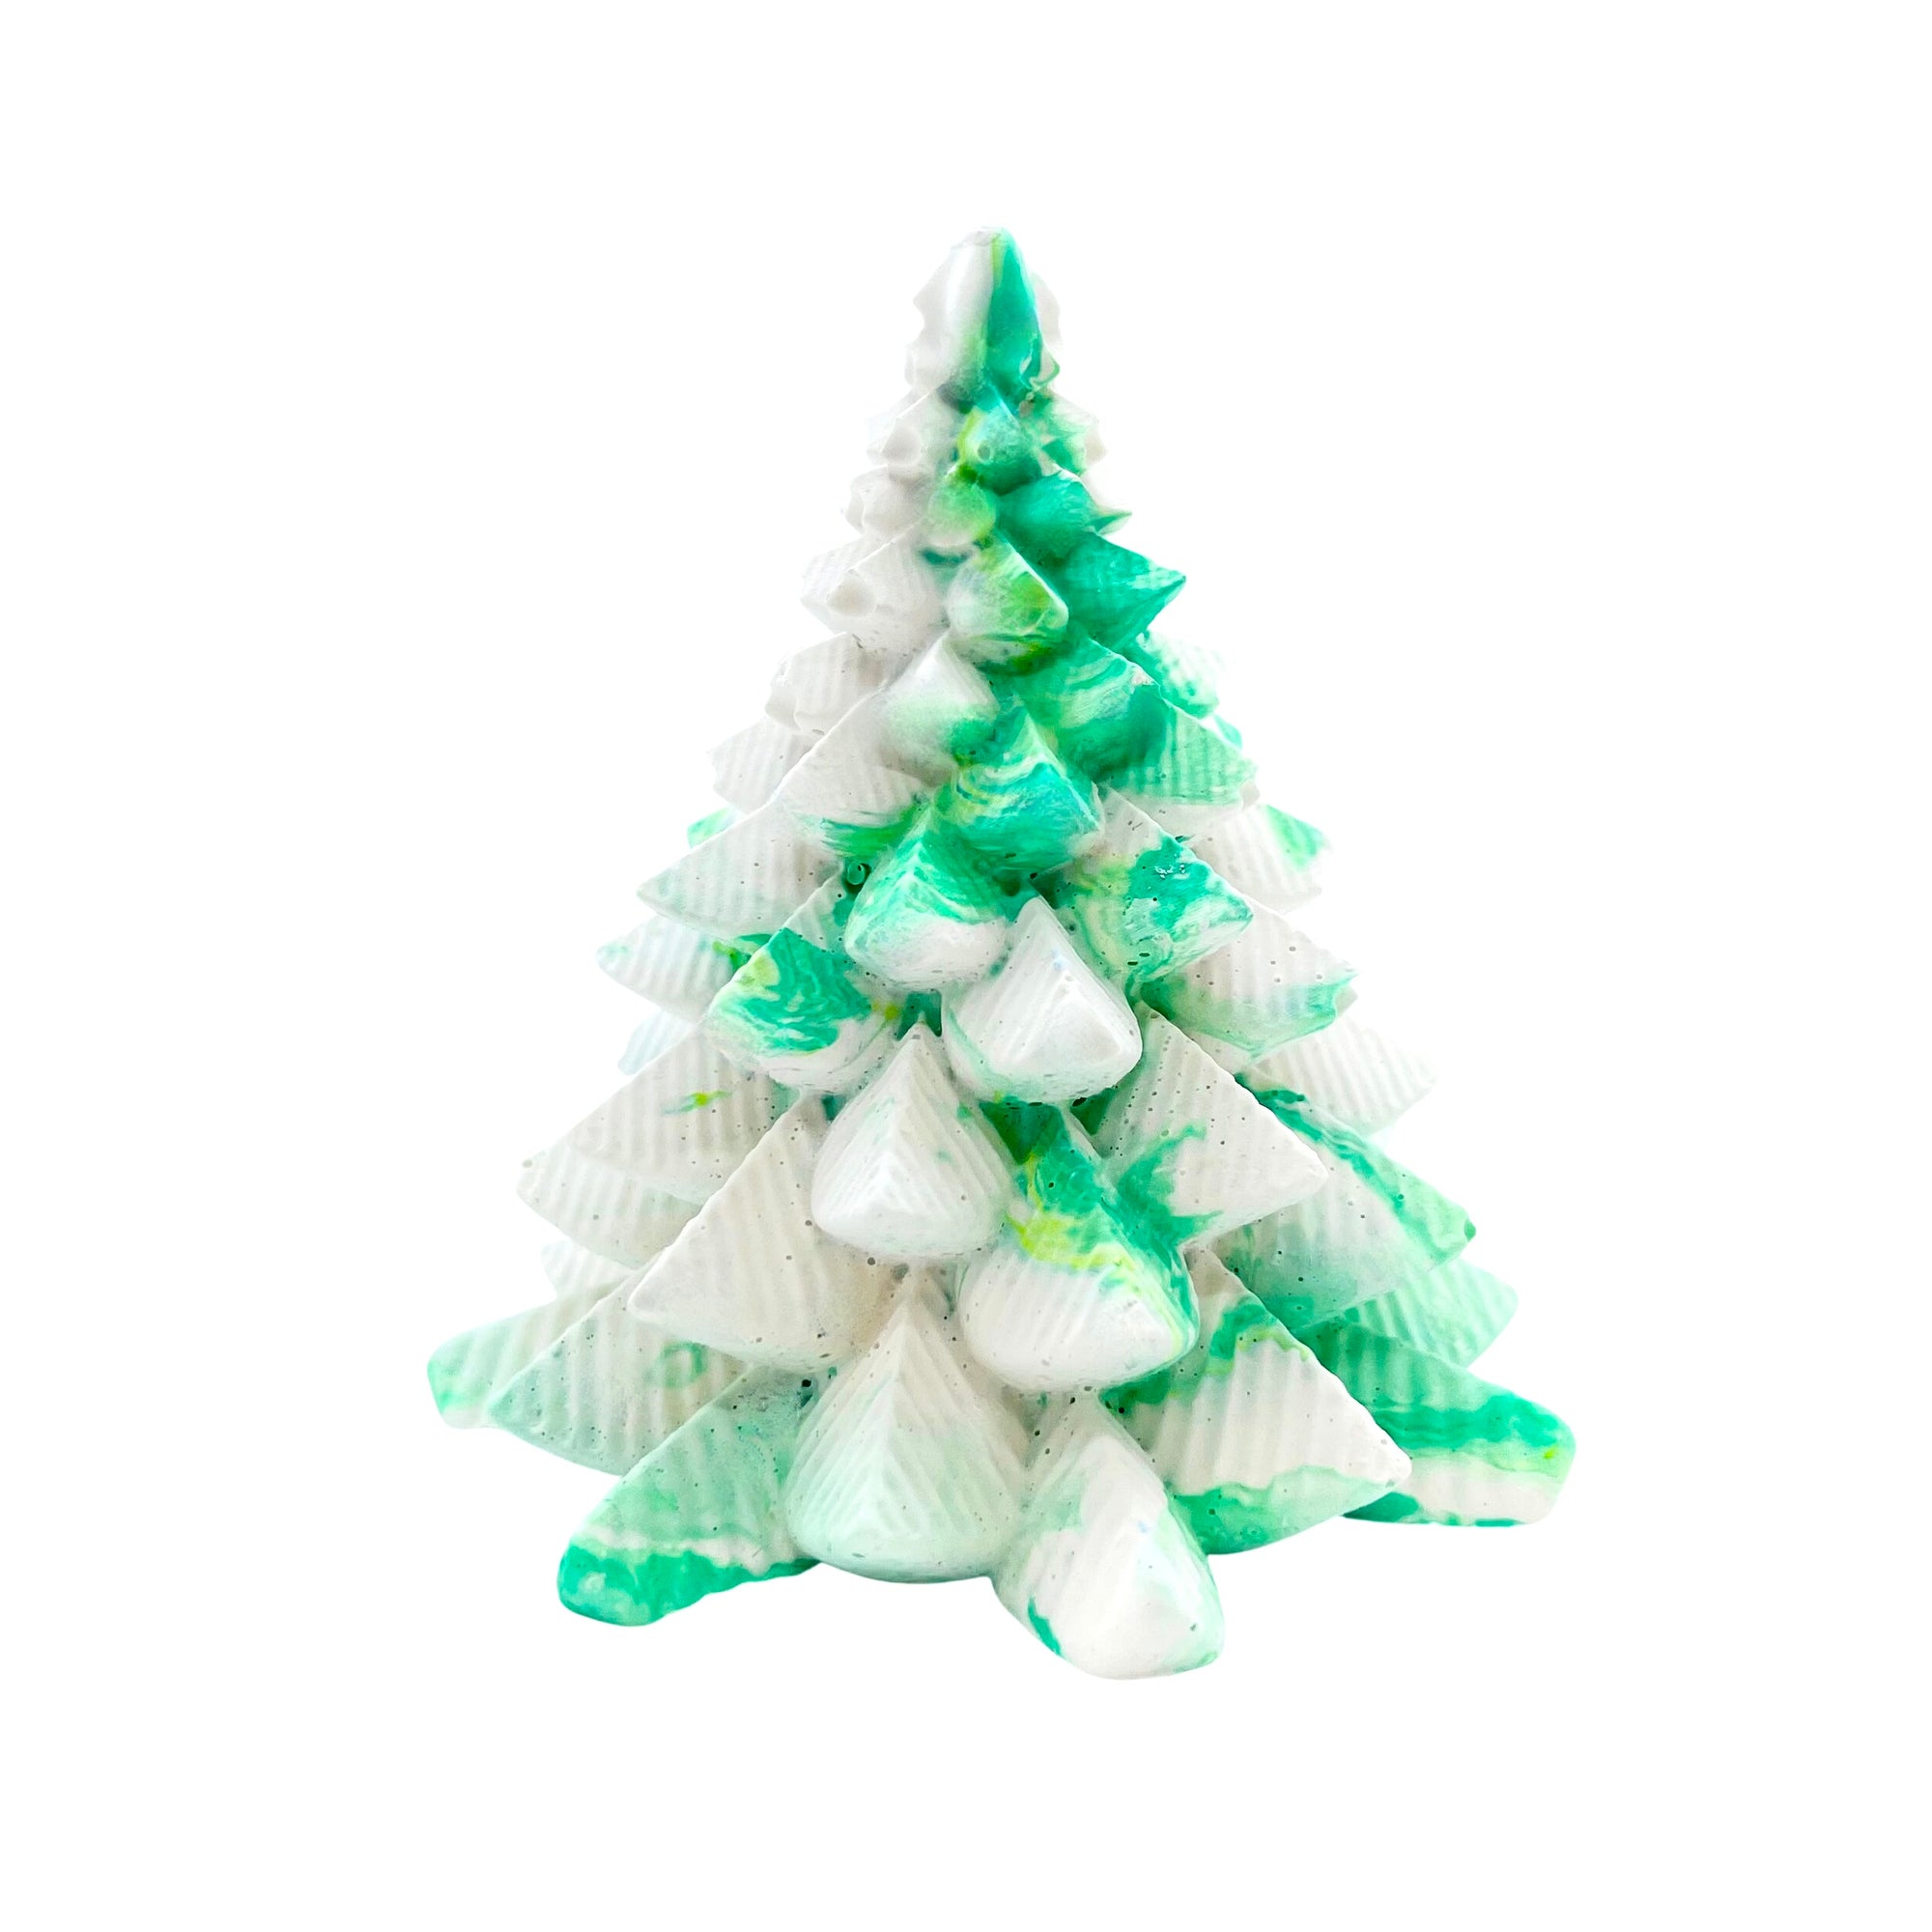 A small Jesmonite Christmas tree measuring 8.5cm tall and 7.5cm wide marbled with green and white pigment.